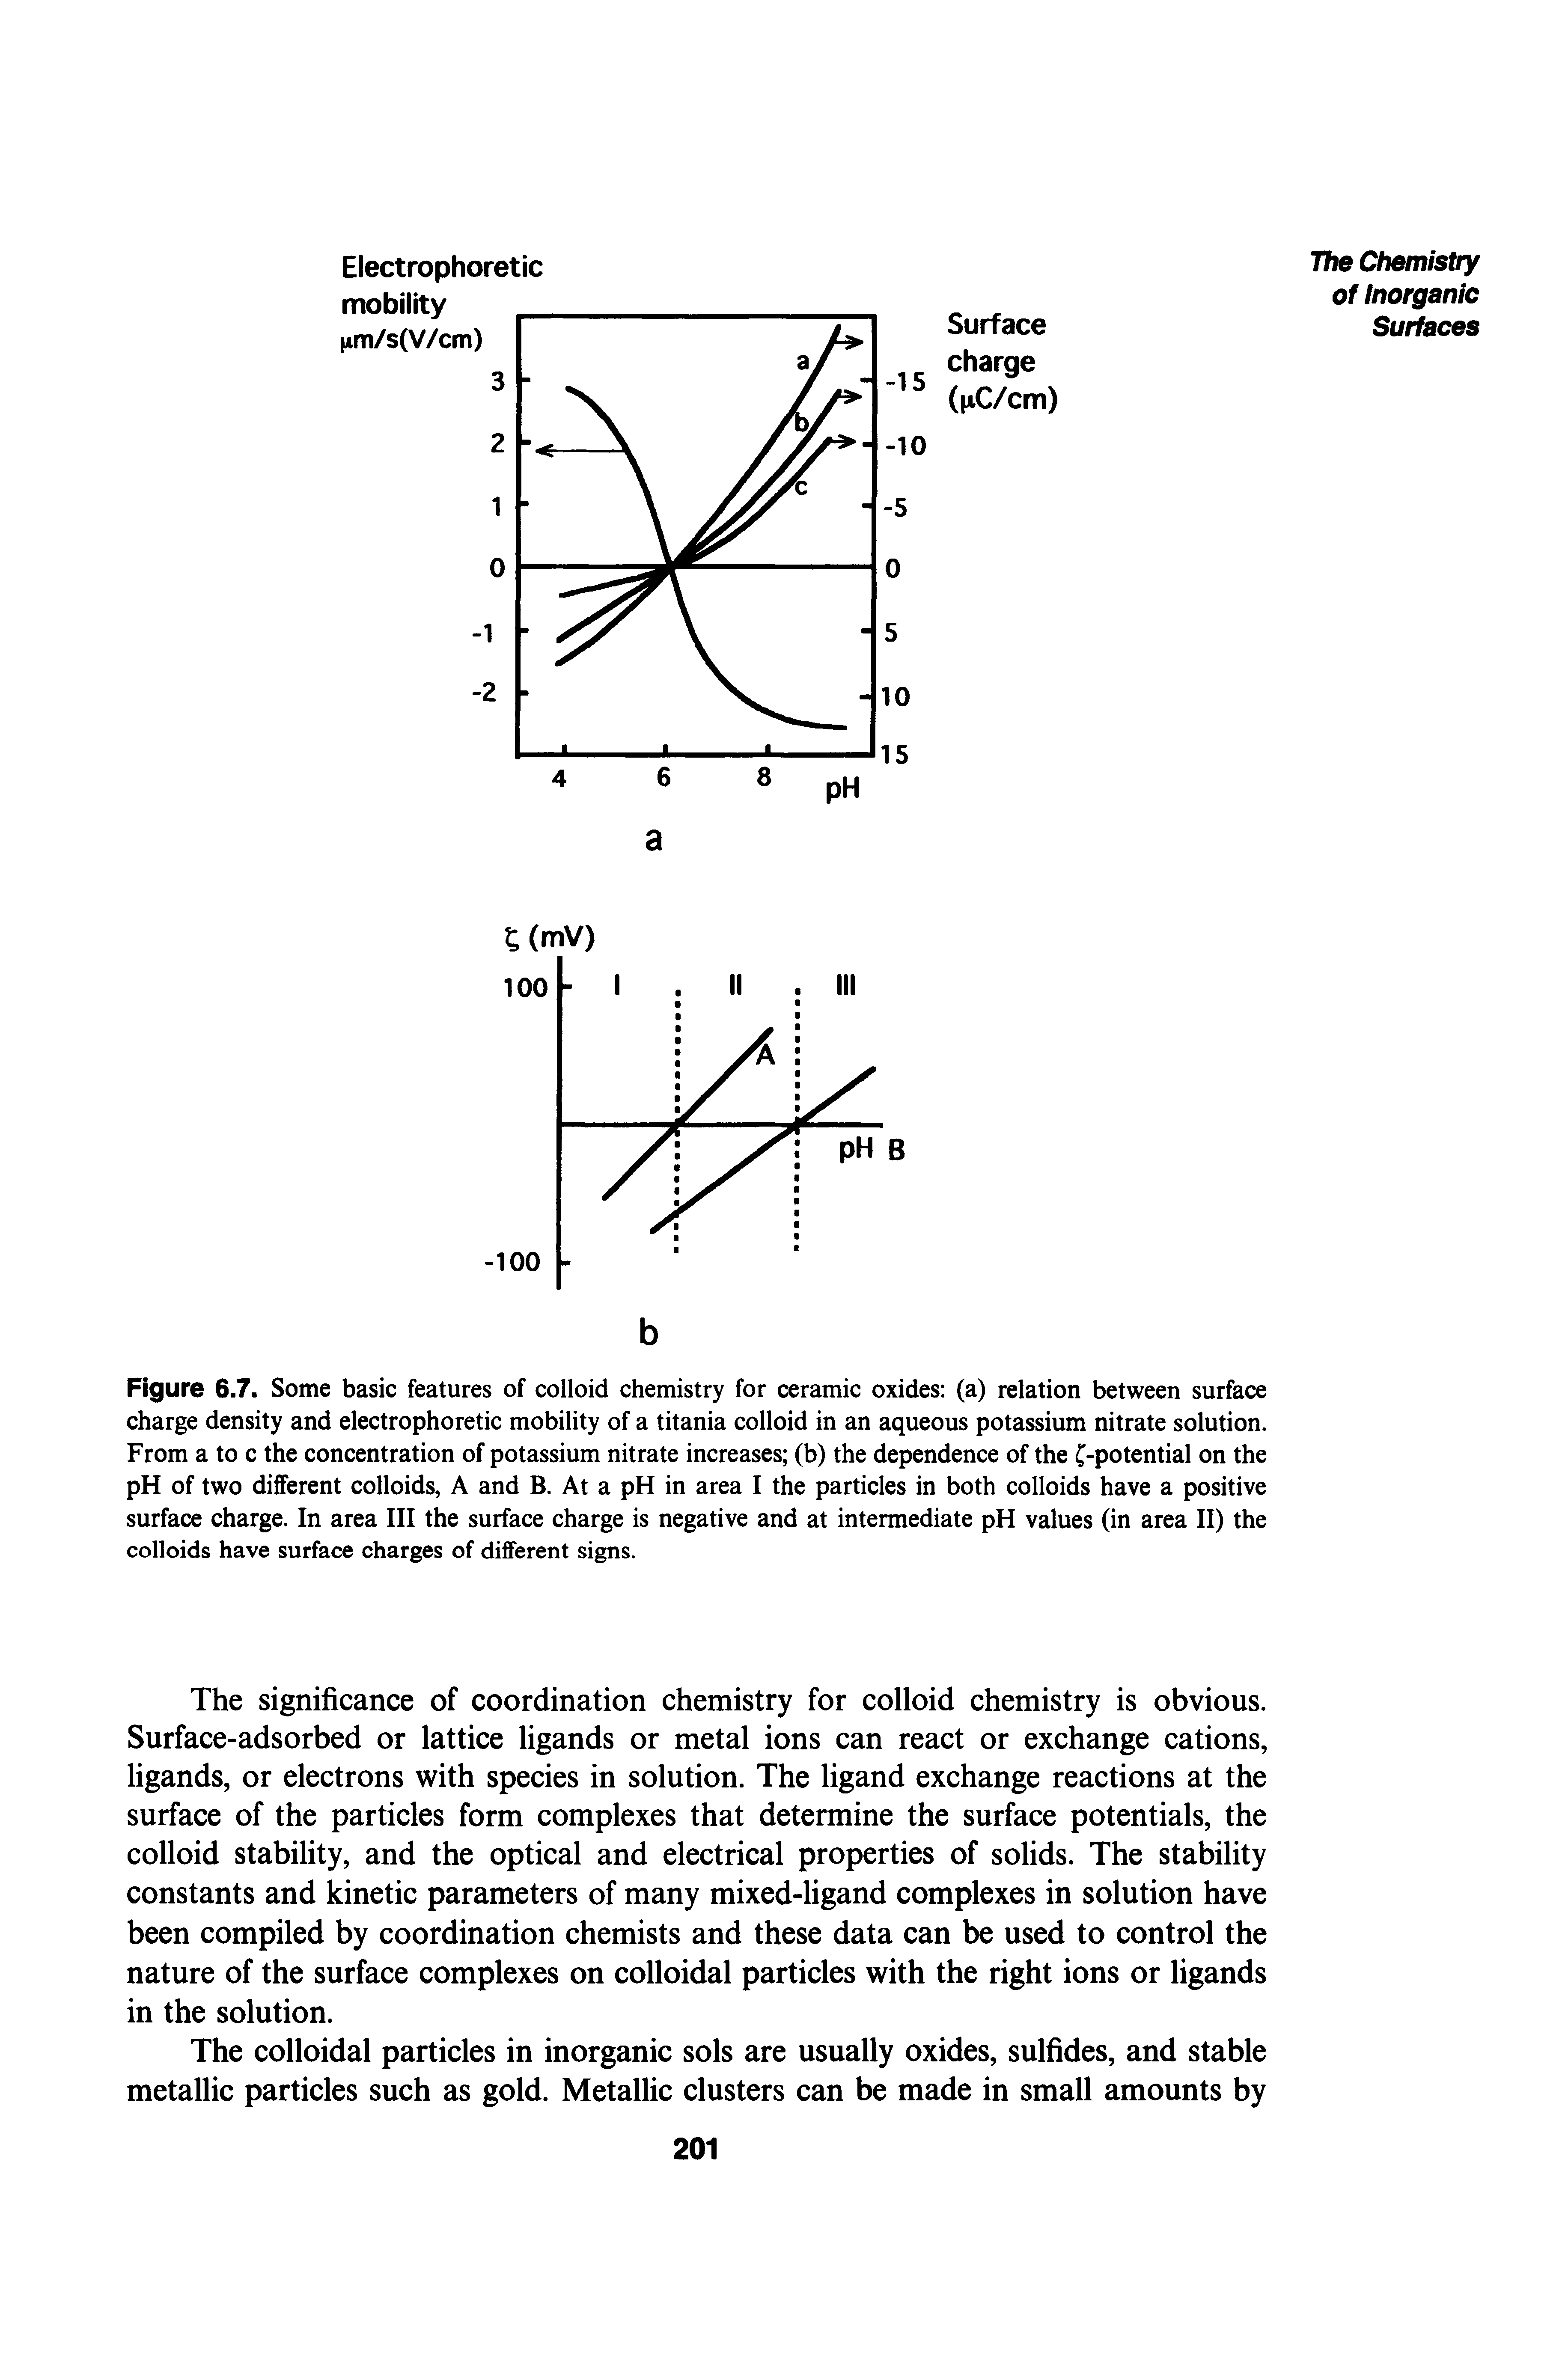 Figure 6.7. Some basic features of colloid chemistry for ceramic oxides (a) relation between surface charge density and electrophoretic mobility of a titania colloid in an aqueous potassium nitrate solution. From a to c the concentration of potassium nitrate increases (b) the dependence of the C-potential on the pH of two different colloids, A and B. At a pH in area I the particles in both colloids have a positive surface charge. In area III the surface charge is negative and at intermediate pH values (in area II) the colloids have surface charges of different signs.